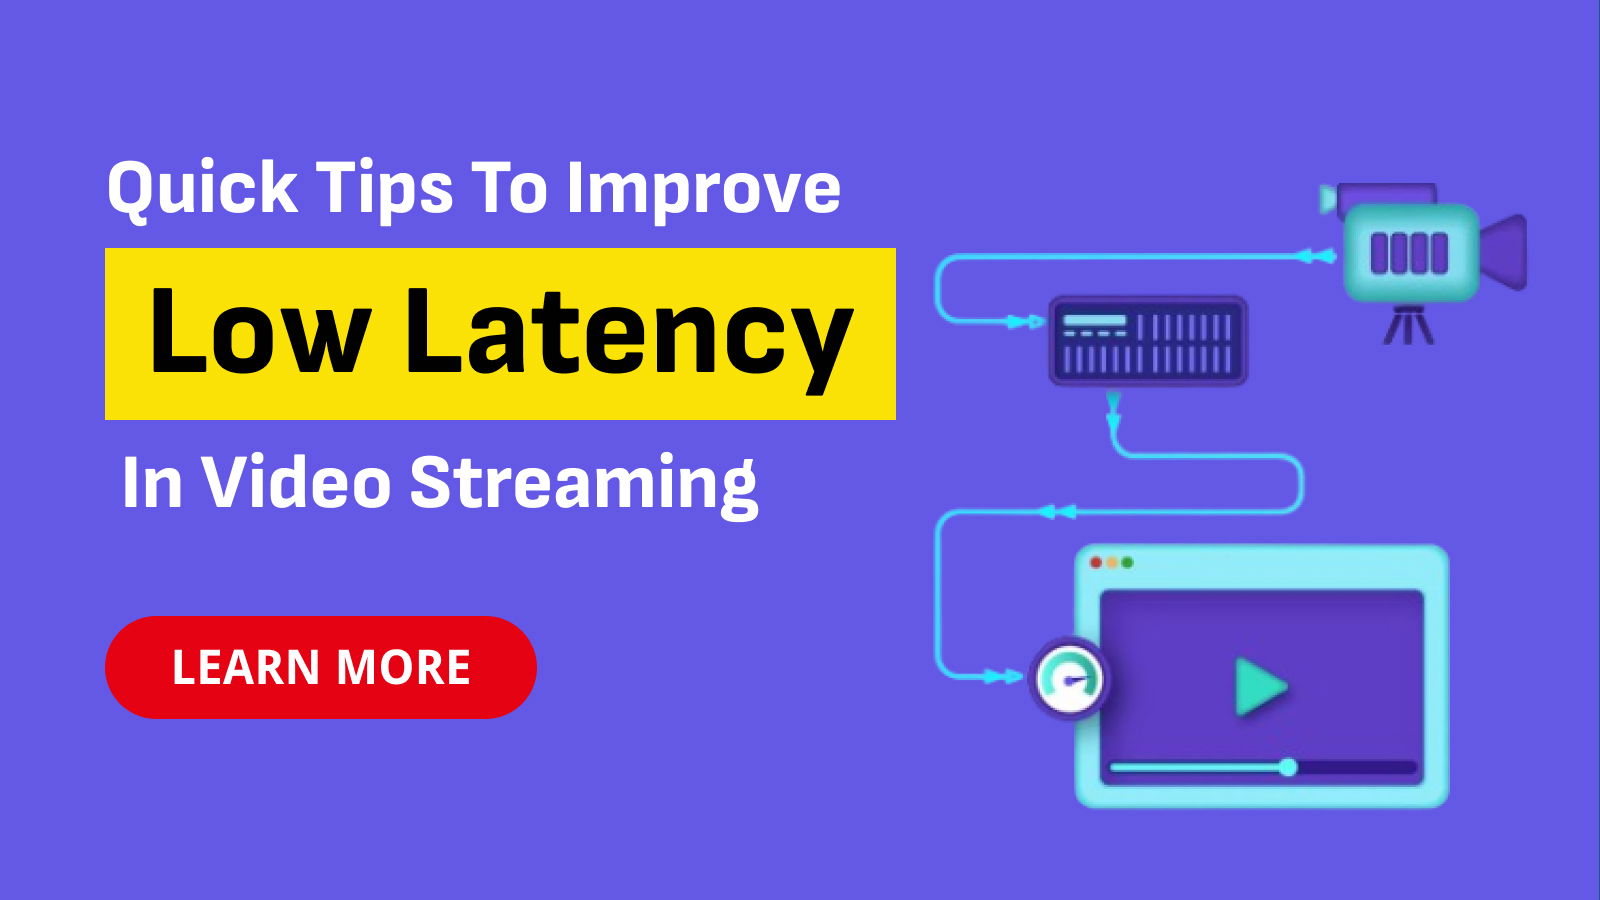 Quick Tips to Improve Low Latency in Video Streaming